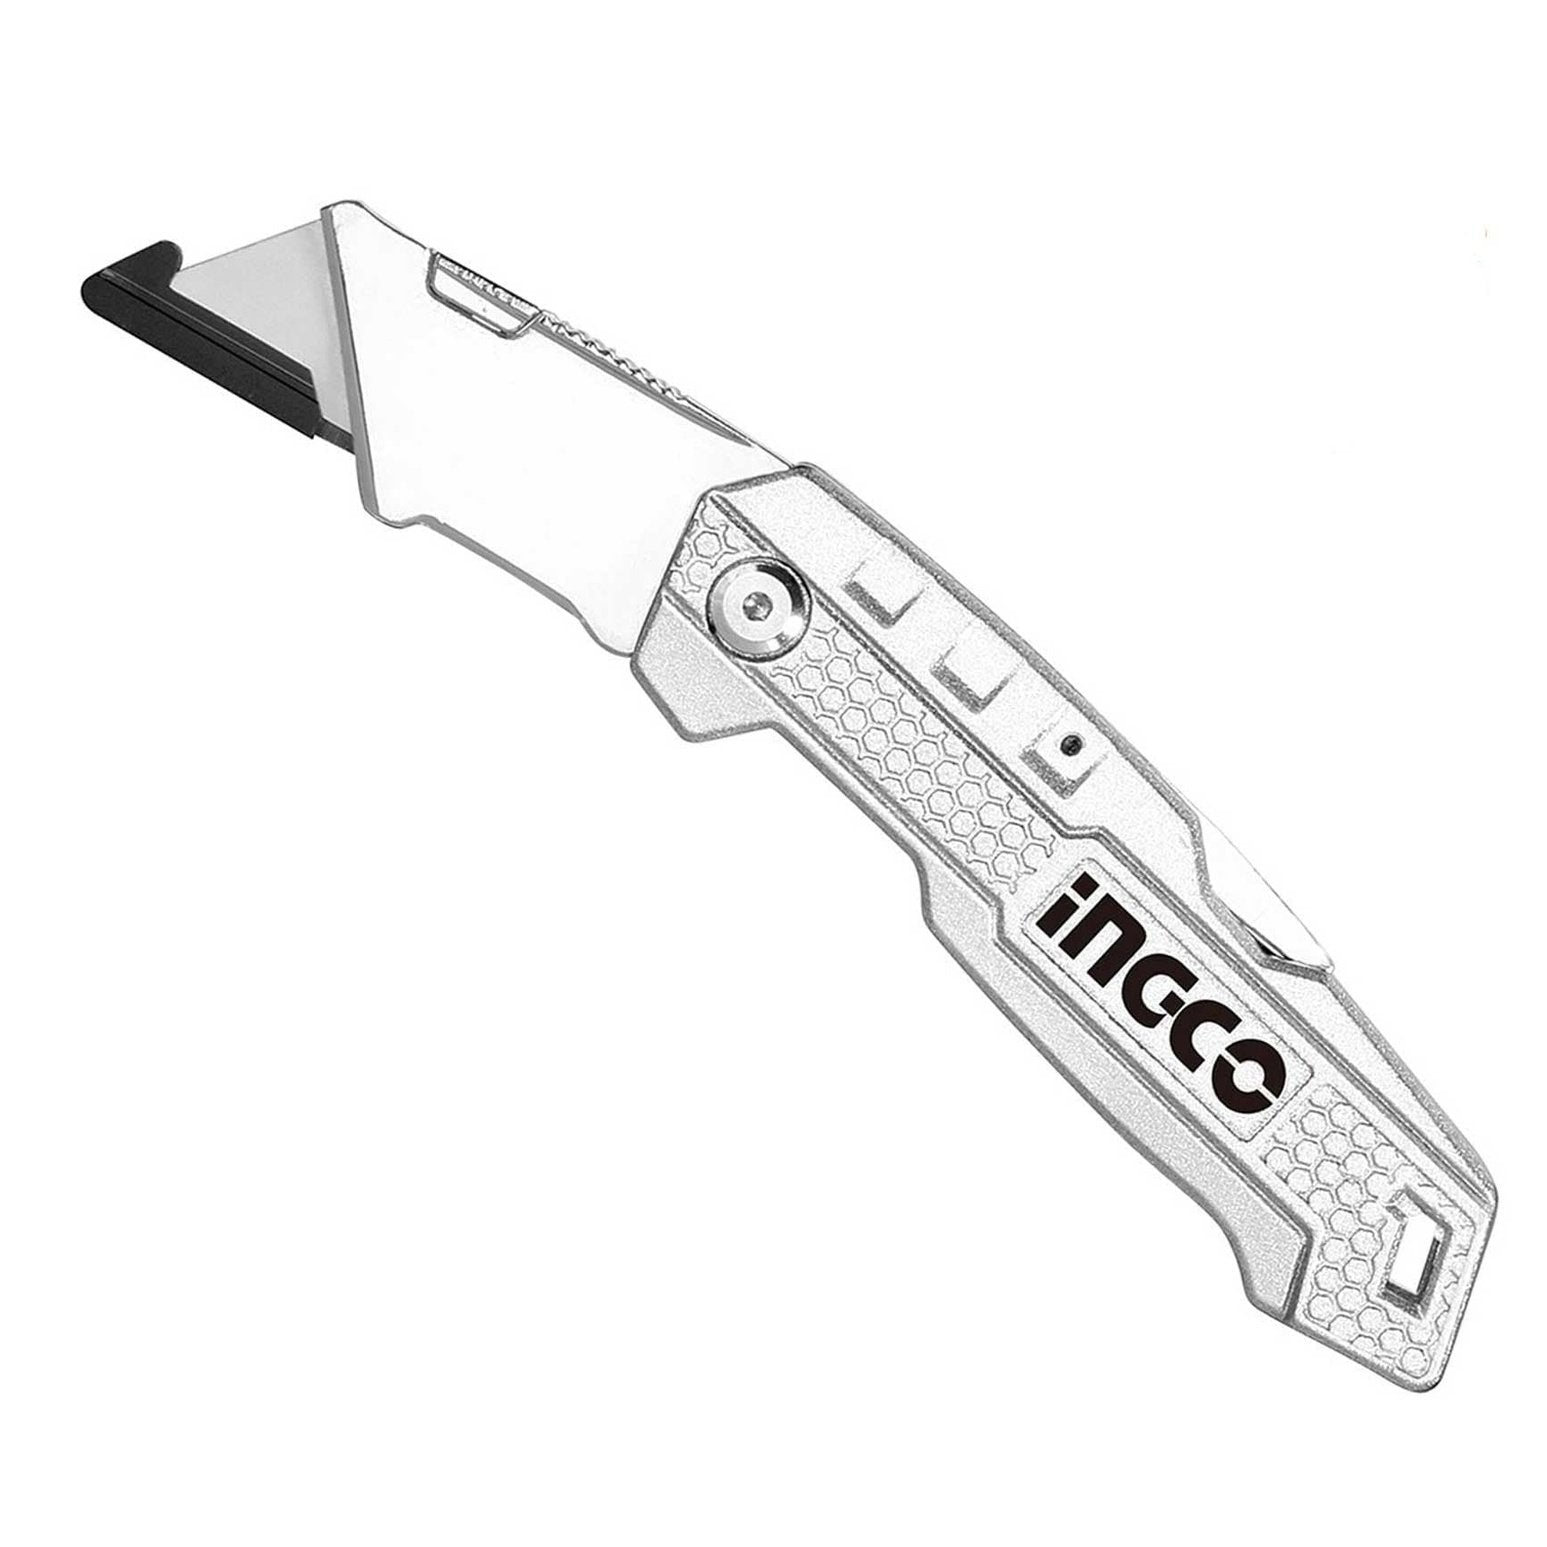 Ingco 2" Folding Knife - HFSW18028C | Supply Master Accra, Ghana Hand Saws & Cutting Tools Buy Tools hardware Building materials